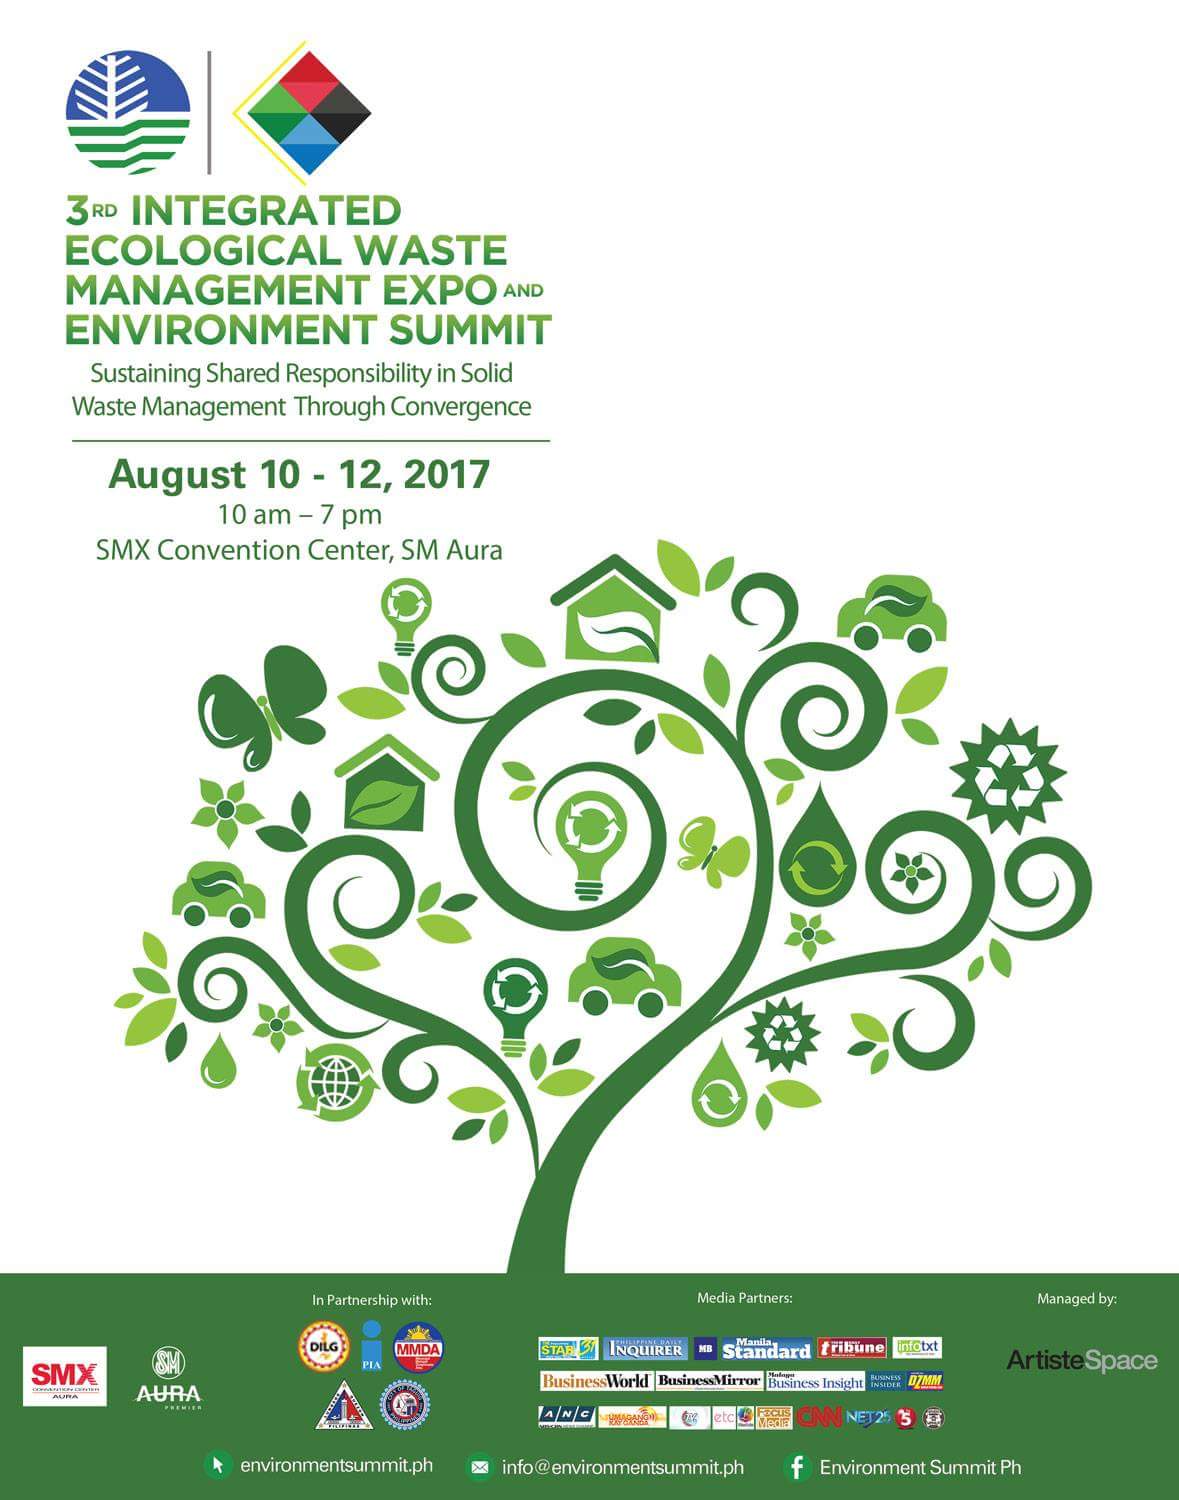 The 3rd Integrated Waste Management Expo and Environment Summit